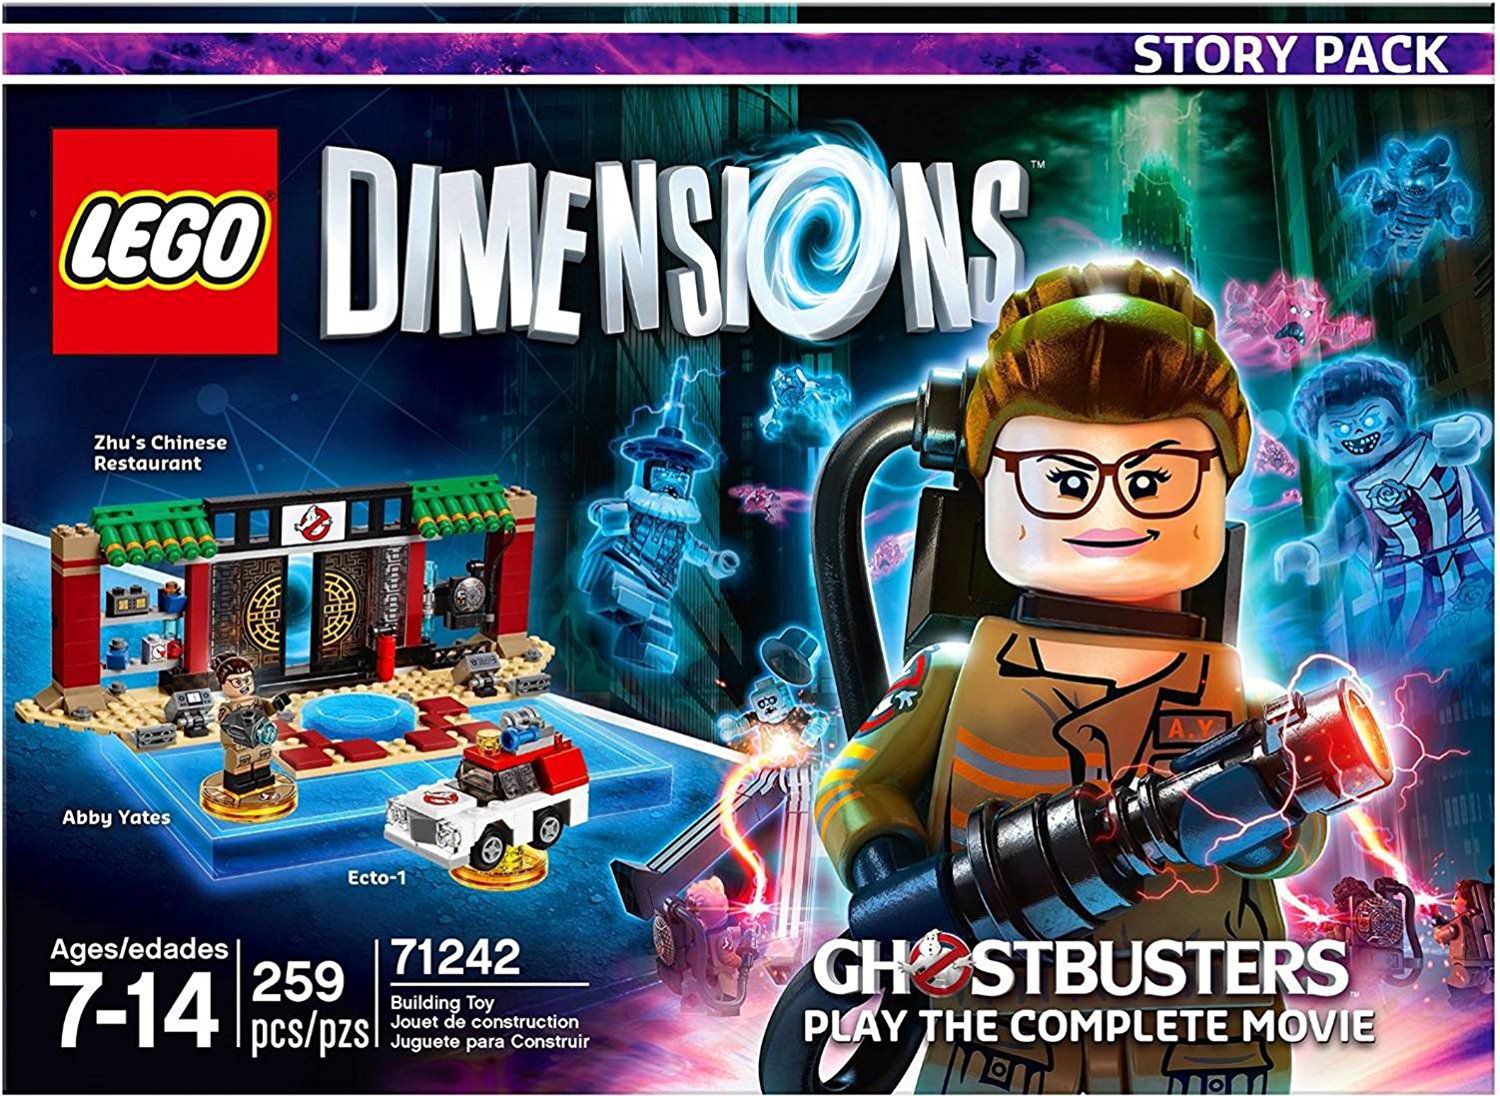 LEGO Dimensions Ghostbusters Story Pack Game Games Loja de Games